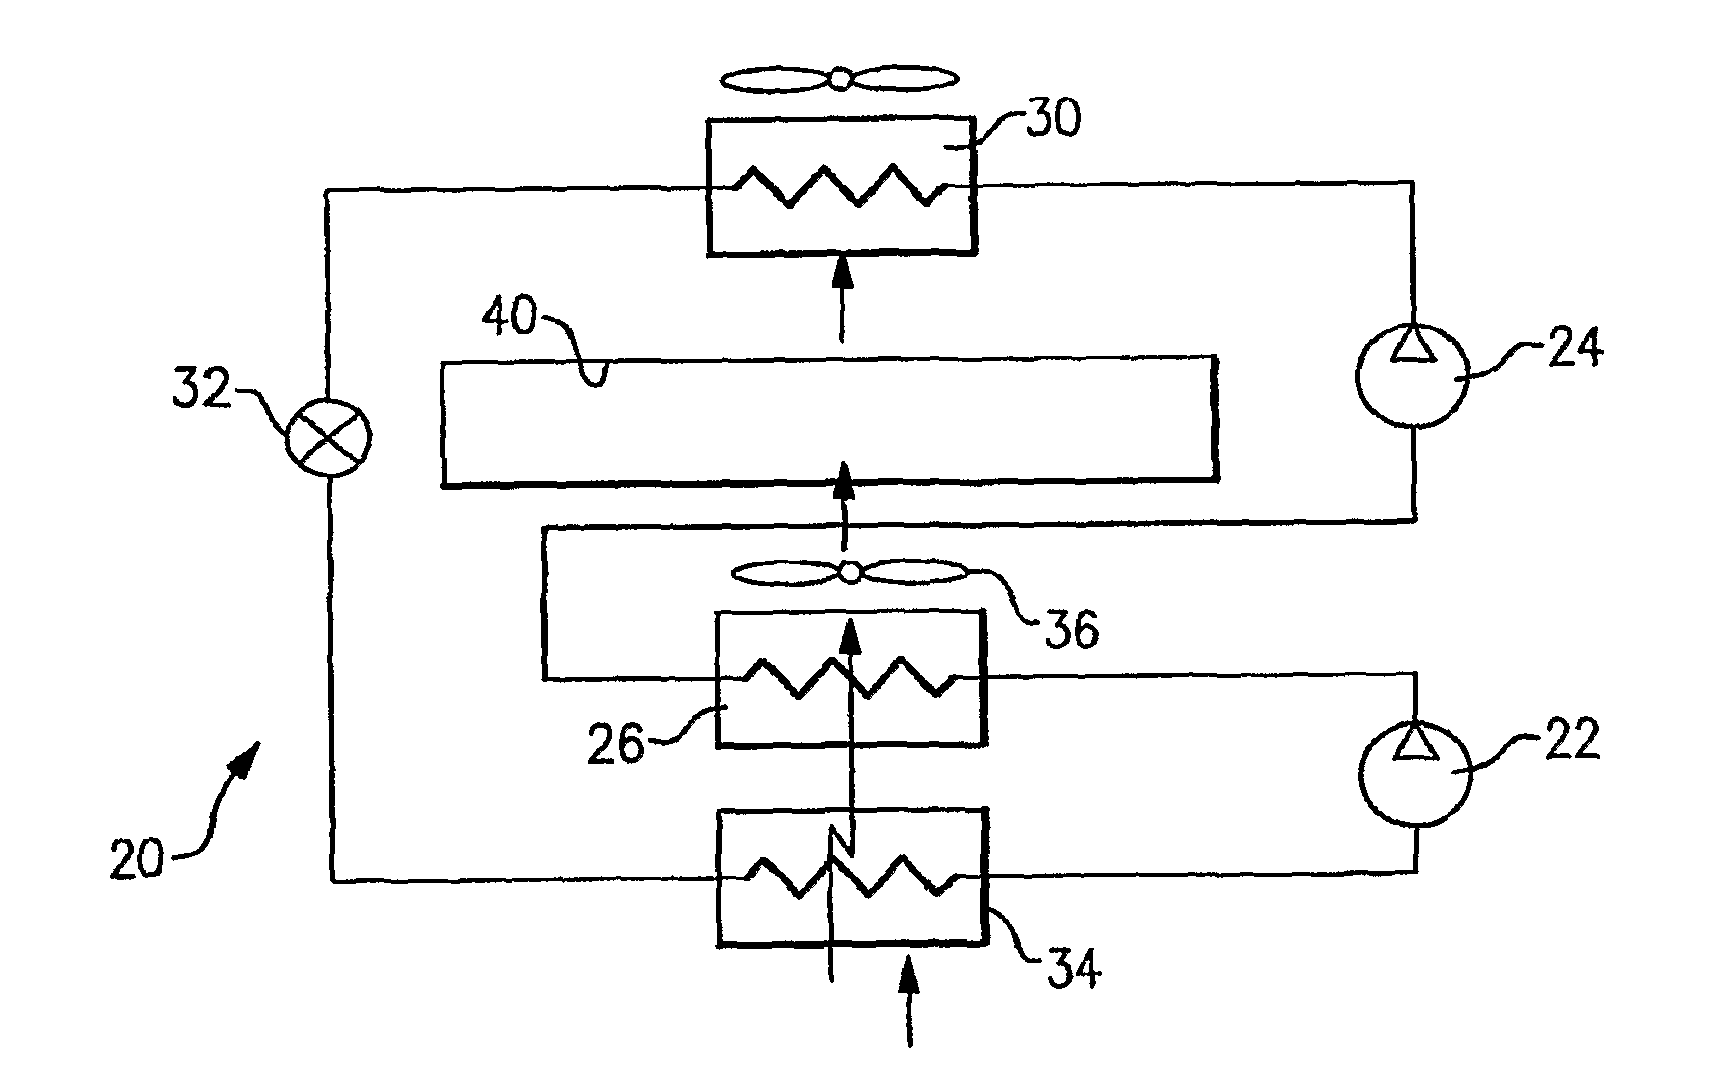 Refrigerant system with intercooler utilized for reheat function